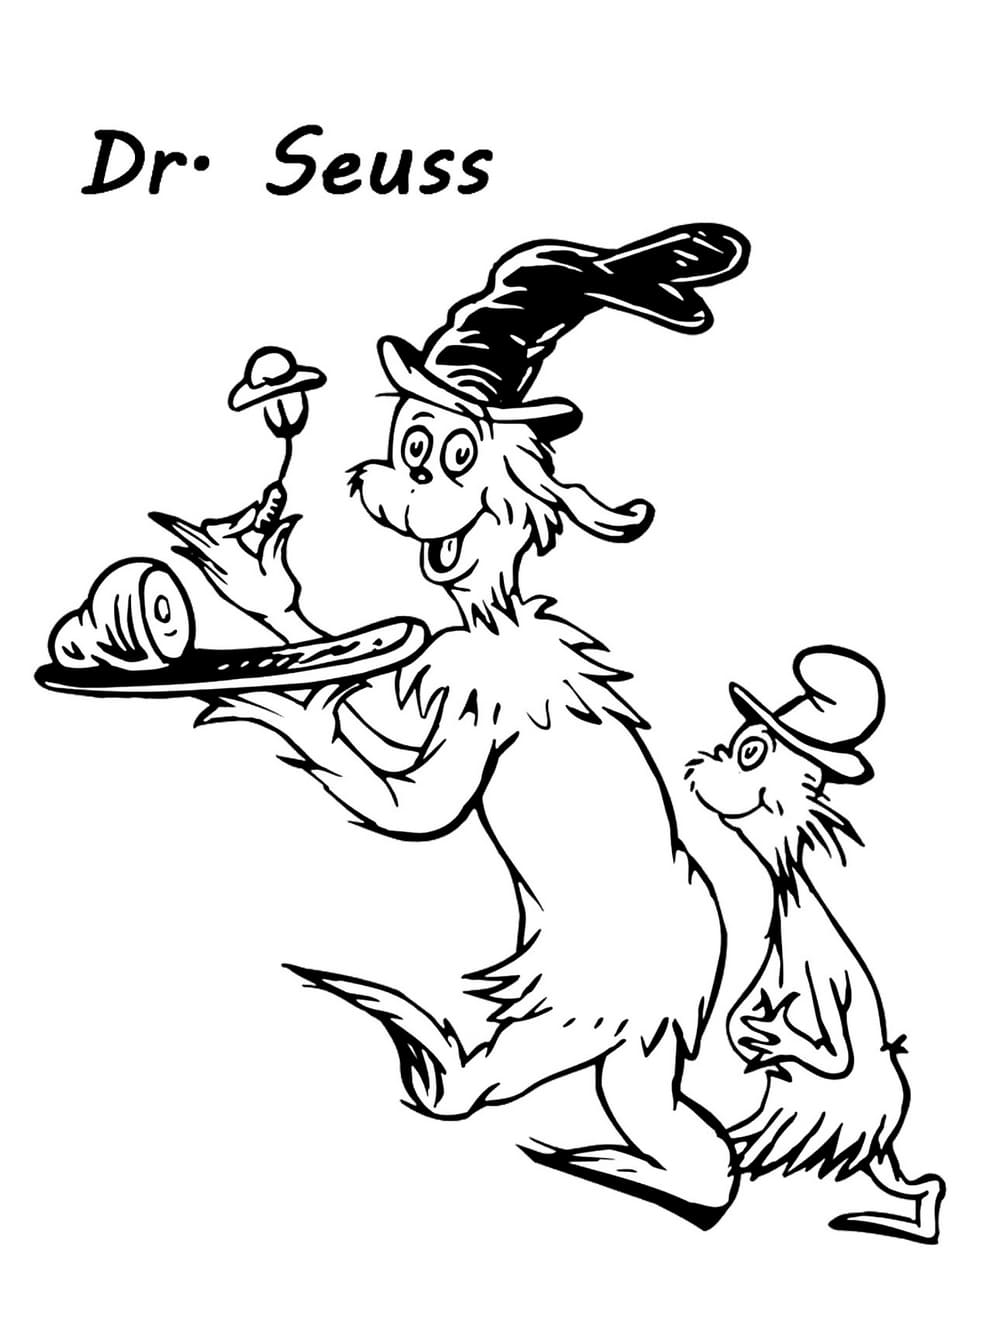 Green Eggs And Ham Coloring Pages Wonder Day Coloring Pages For Children And Adults